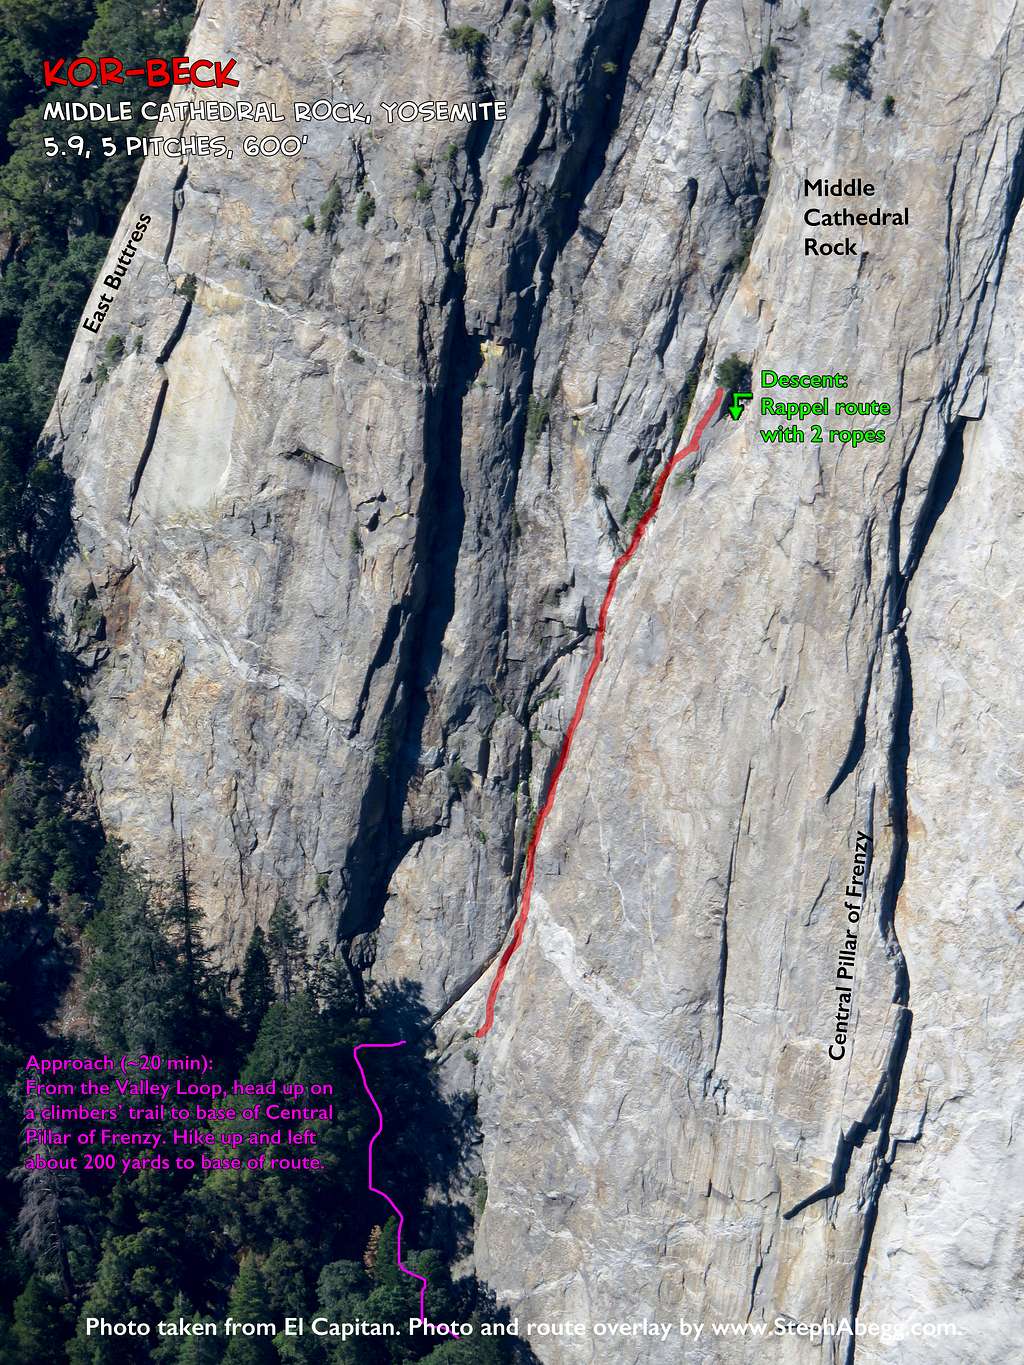 Route Overlay for Kor Beck on Middle Cathedral